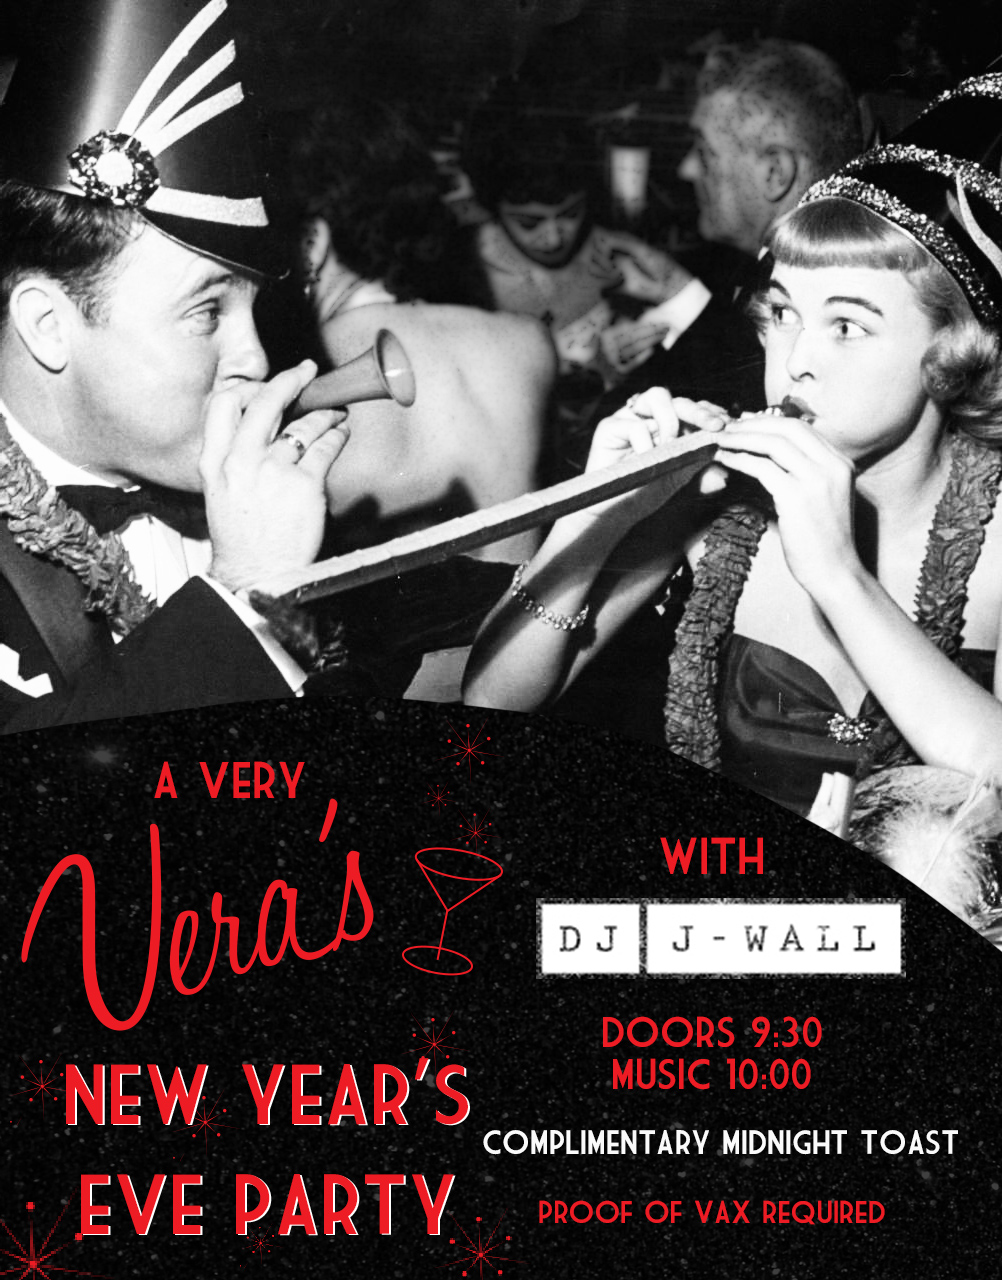 New Year’s Eve Plans Confirmed: Vera’s (formerly Brass Union)